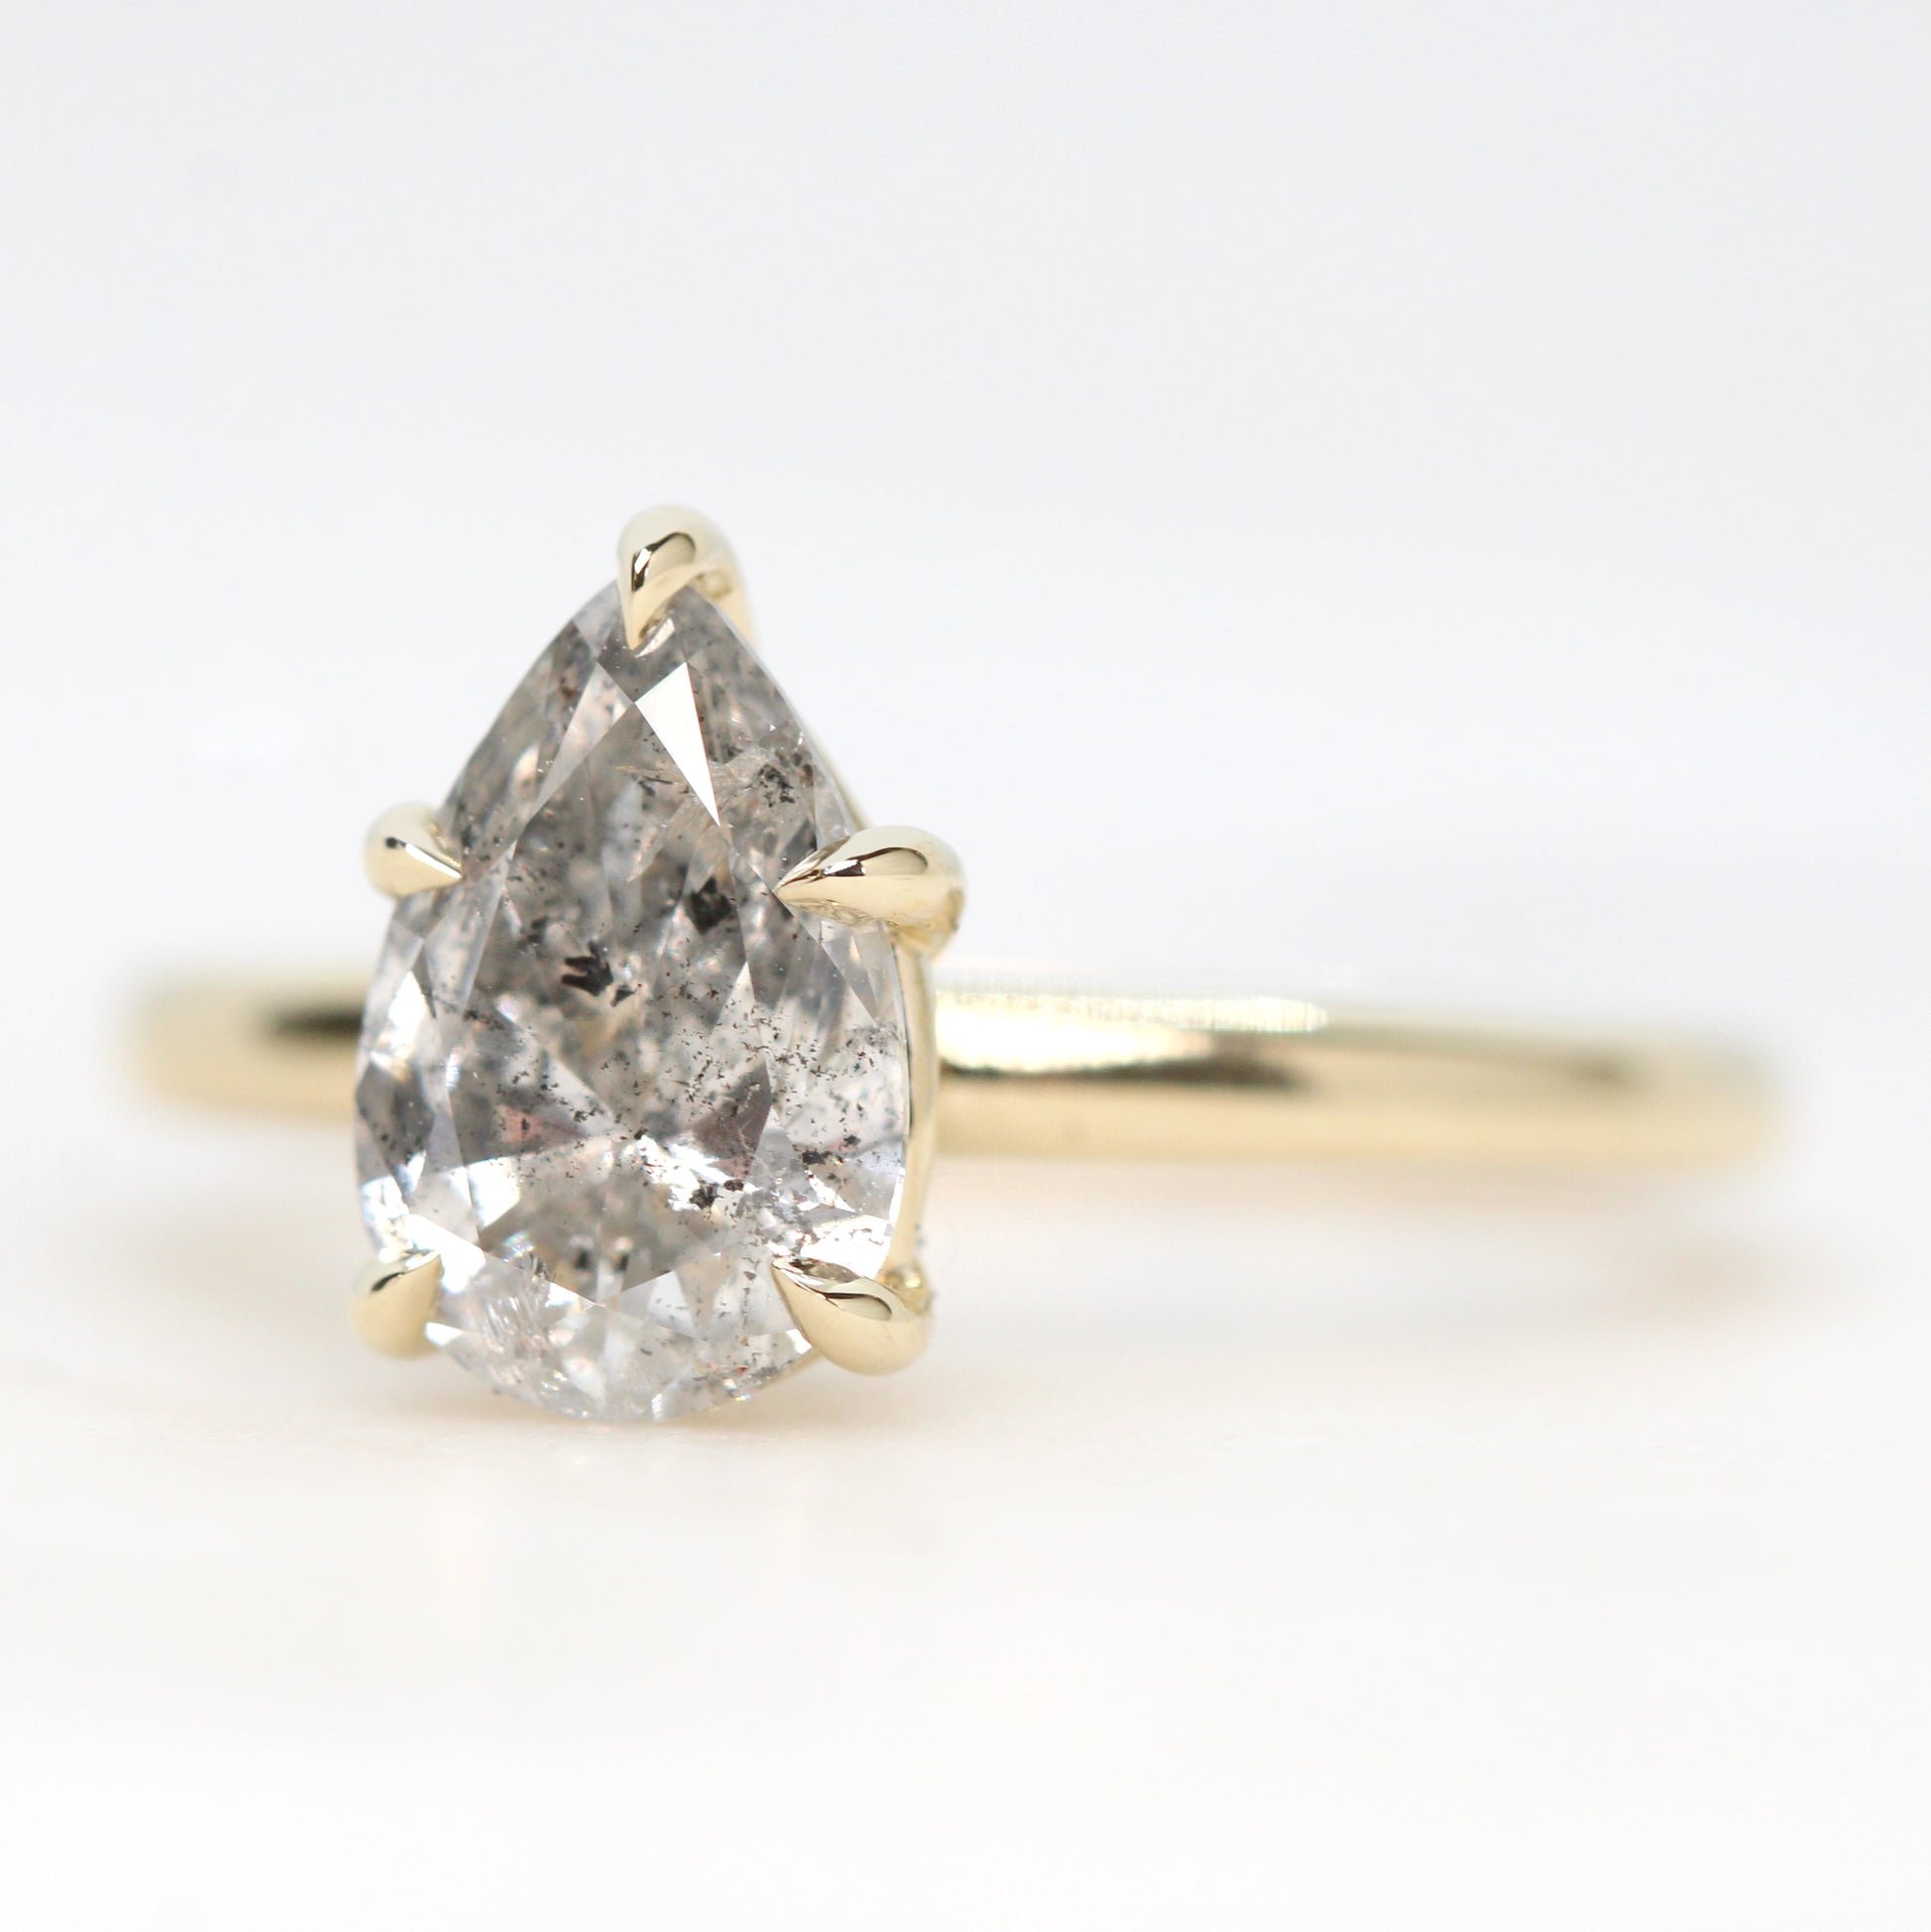 Charlotte Ring with a 1.65 Carat Pear Bright Gray Salt and Pepper Diamond in 14k Yellow Gold - Ready to Size and Ship - Midwinter Co. Alternative Bridal Rings and Modern Fine Jewelry